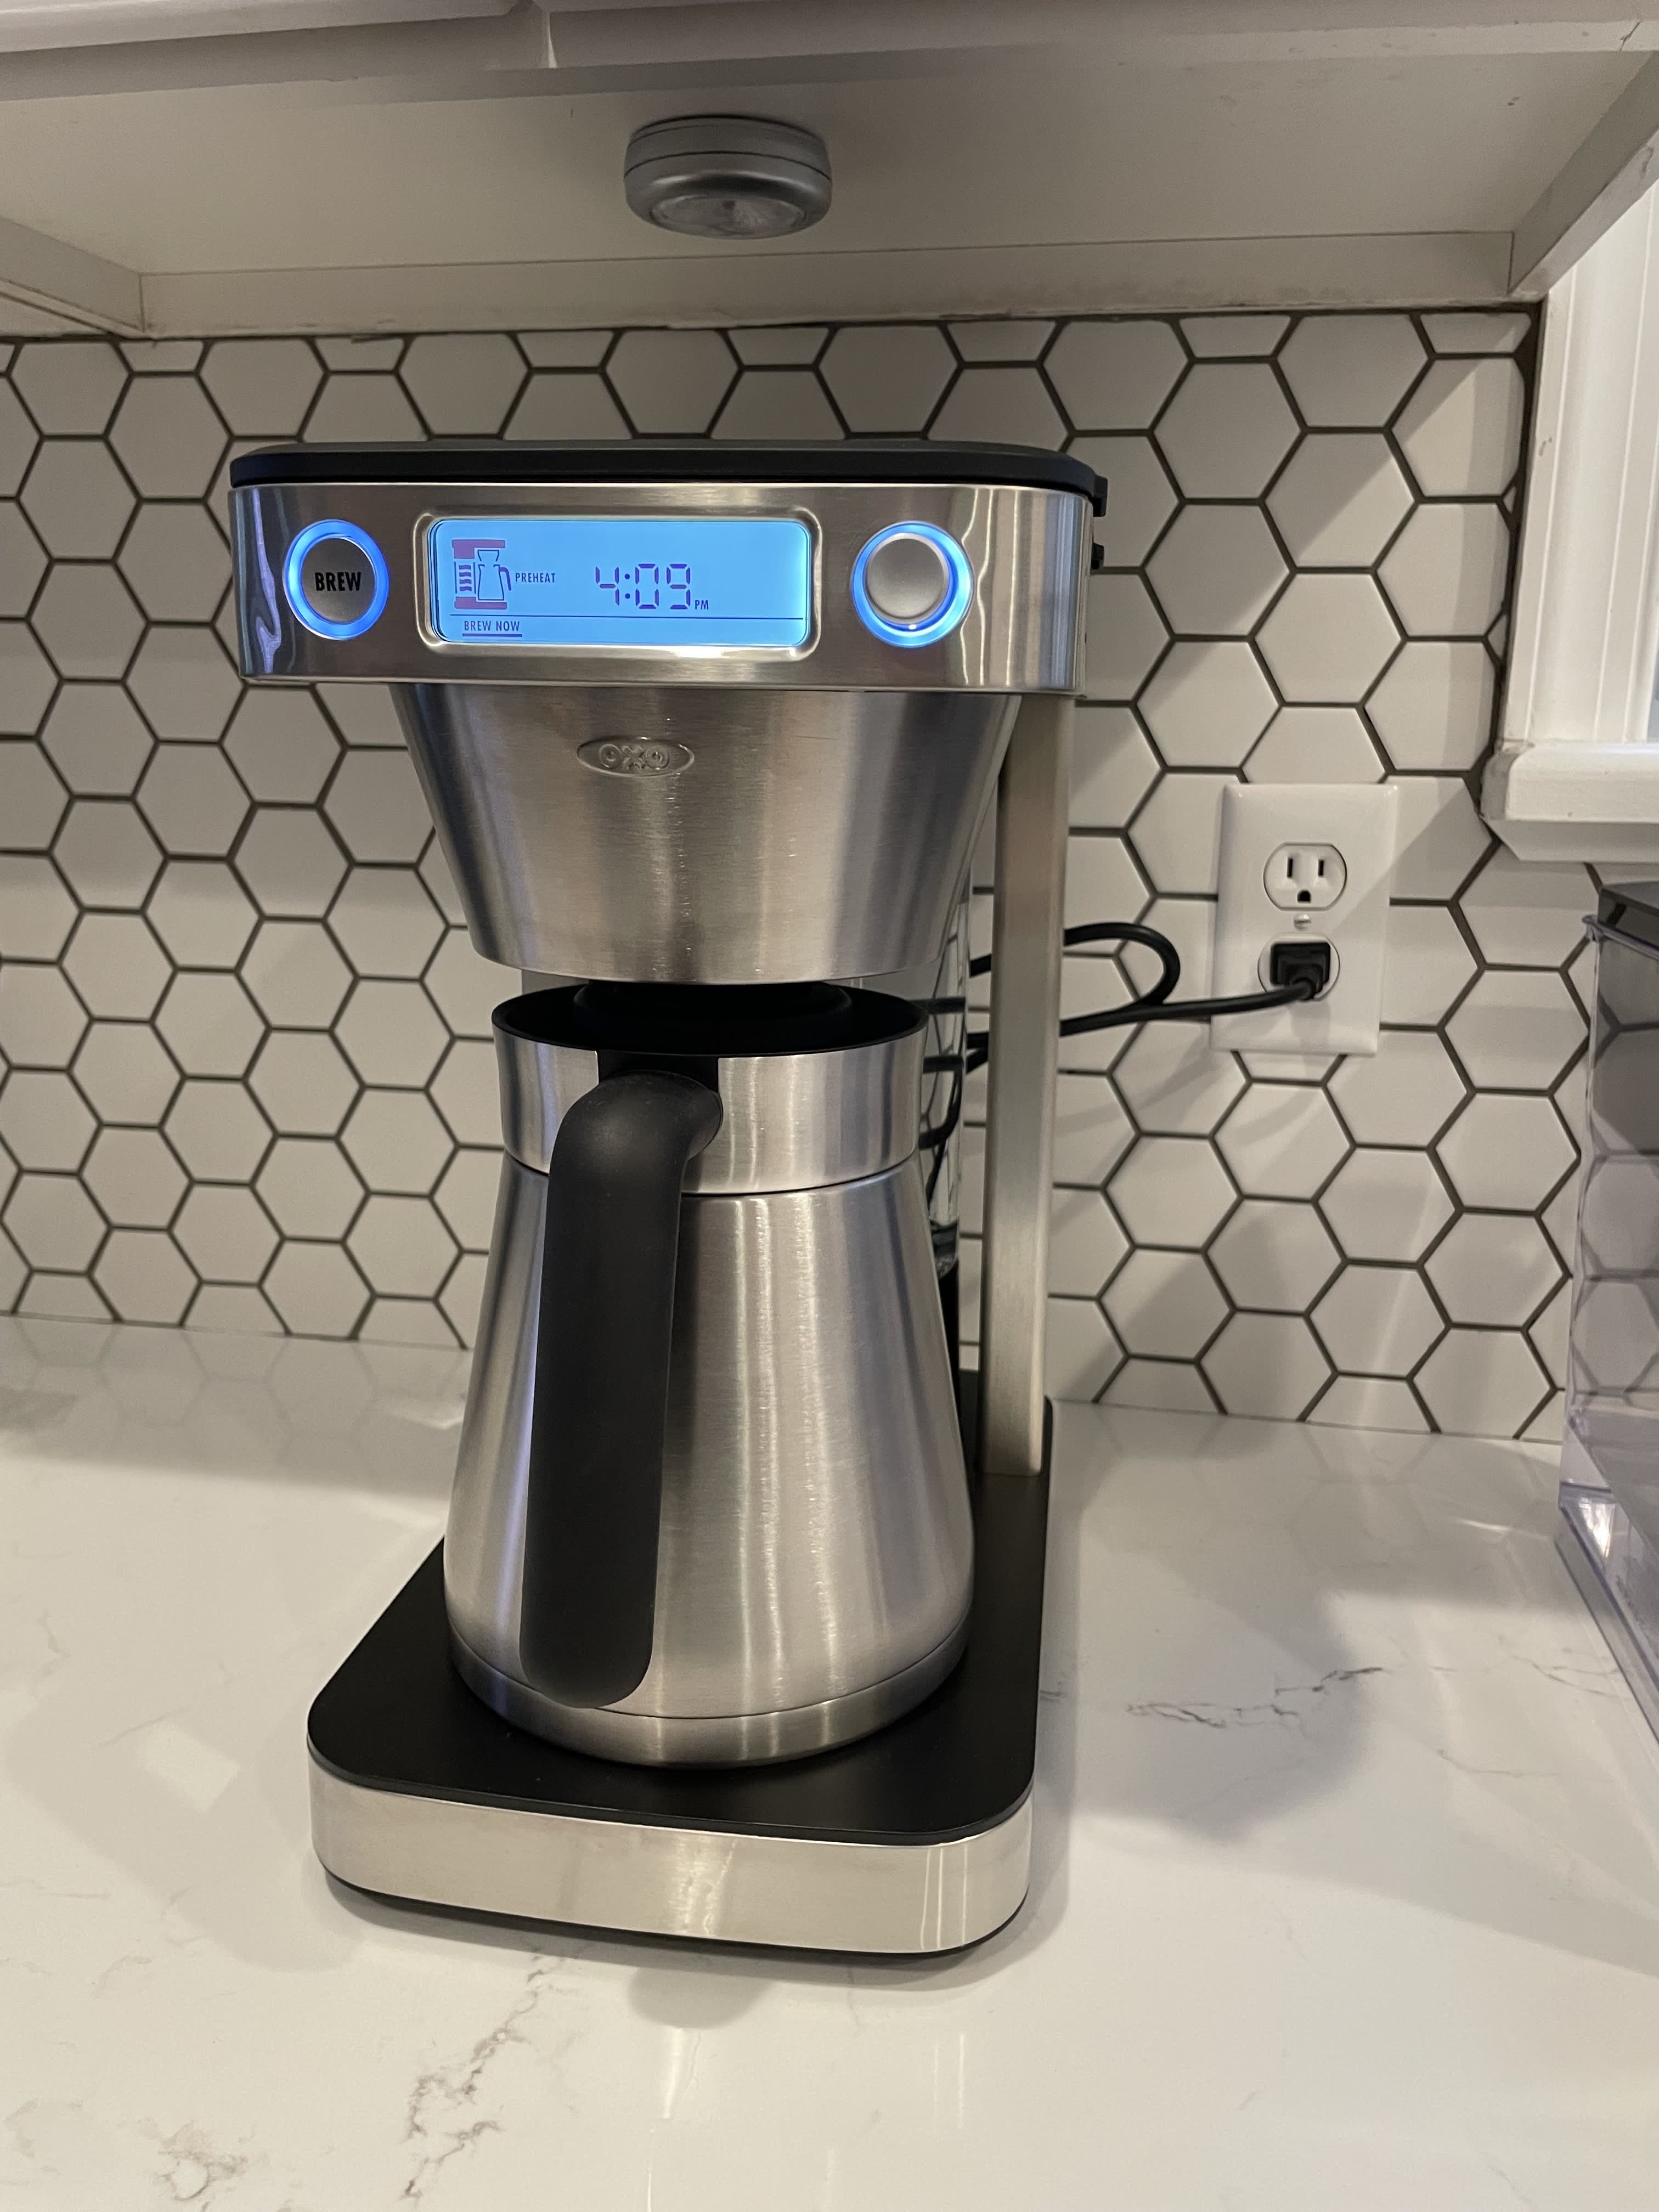 12-Cup Coffee Maker with Podless Single-Serve Function